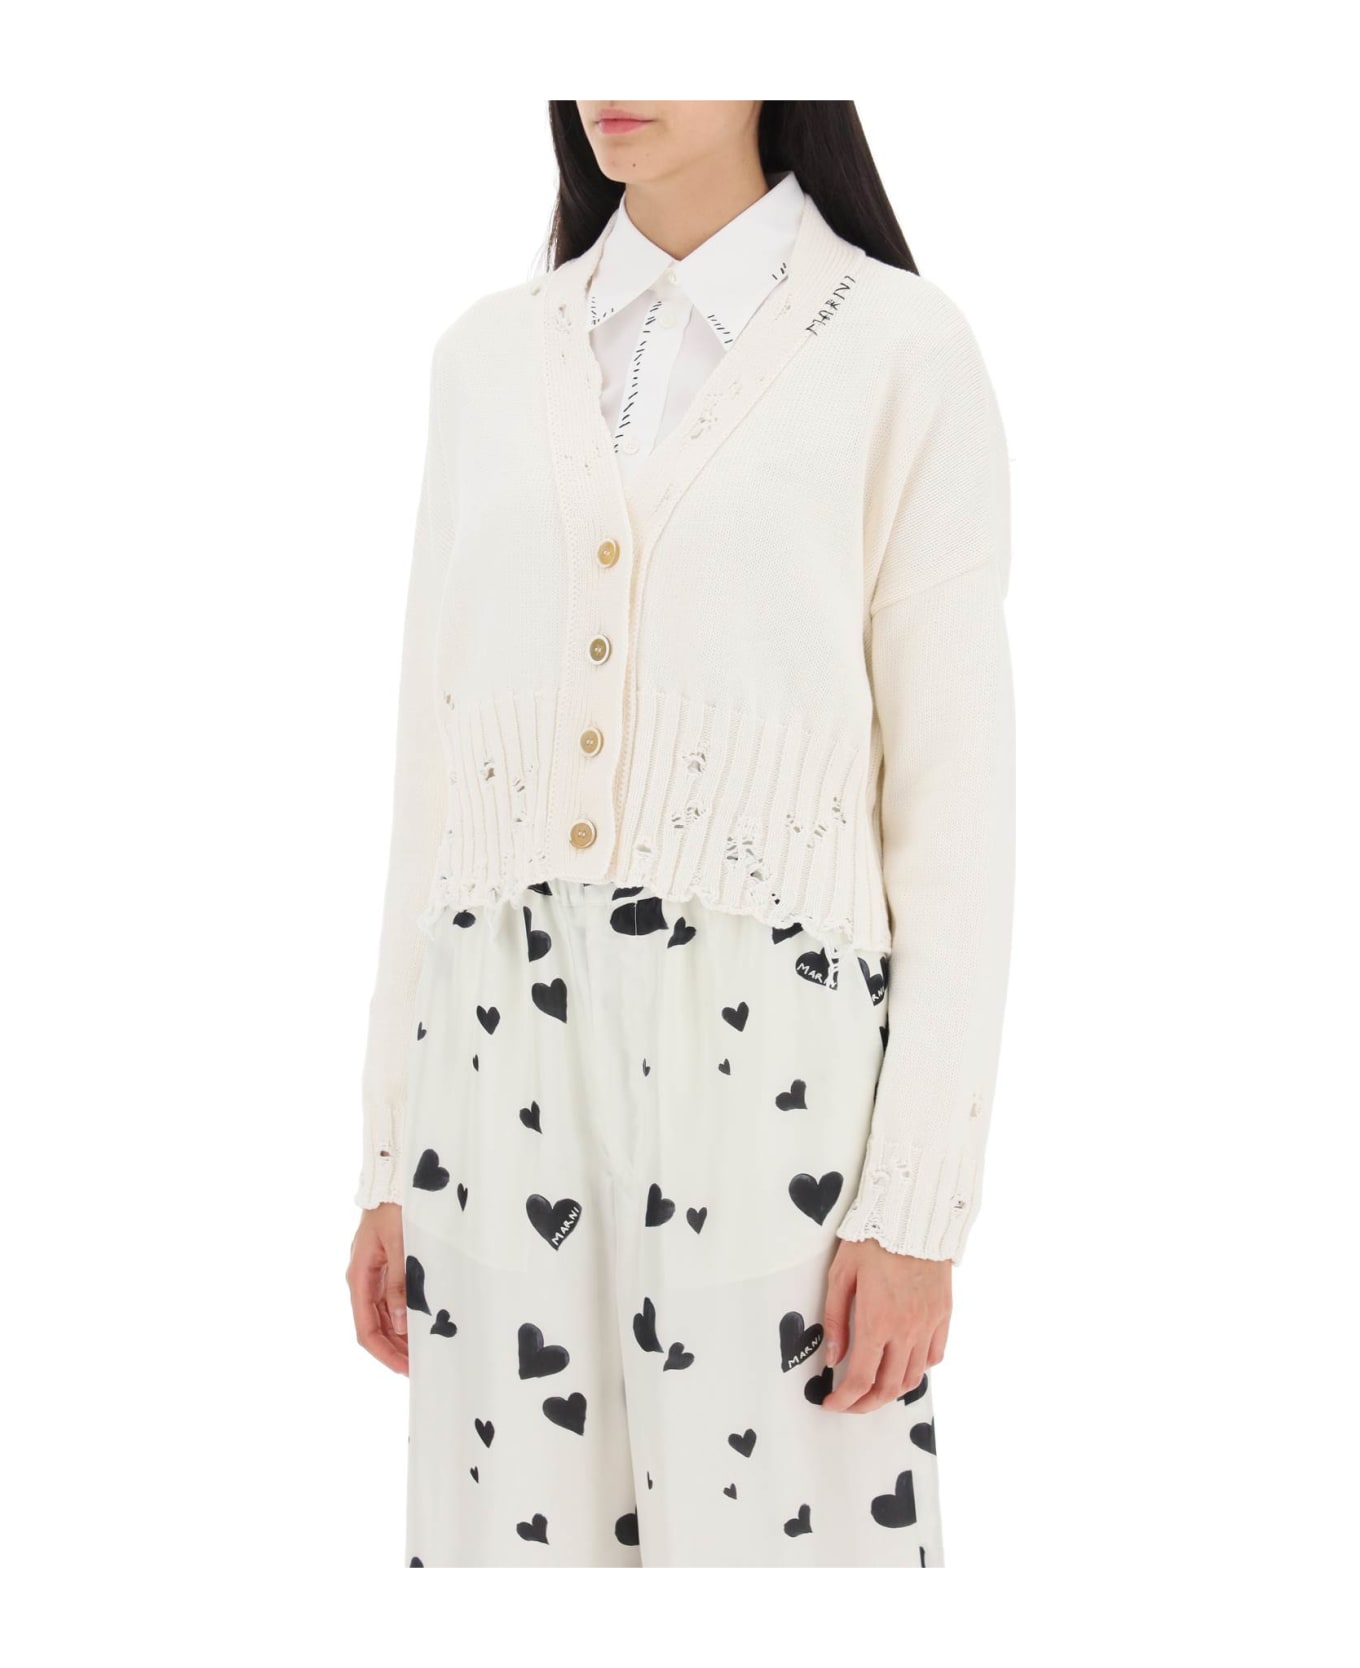 Marni Short Cardigan With White Cotton Wears - LILY WHITE (White)